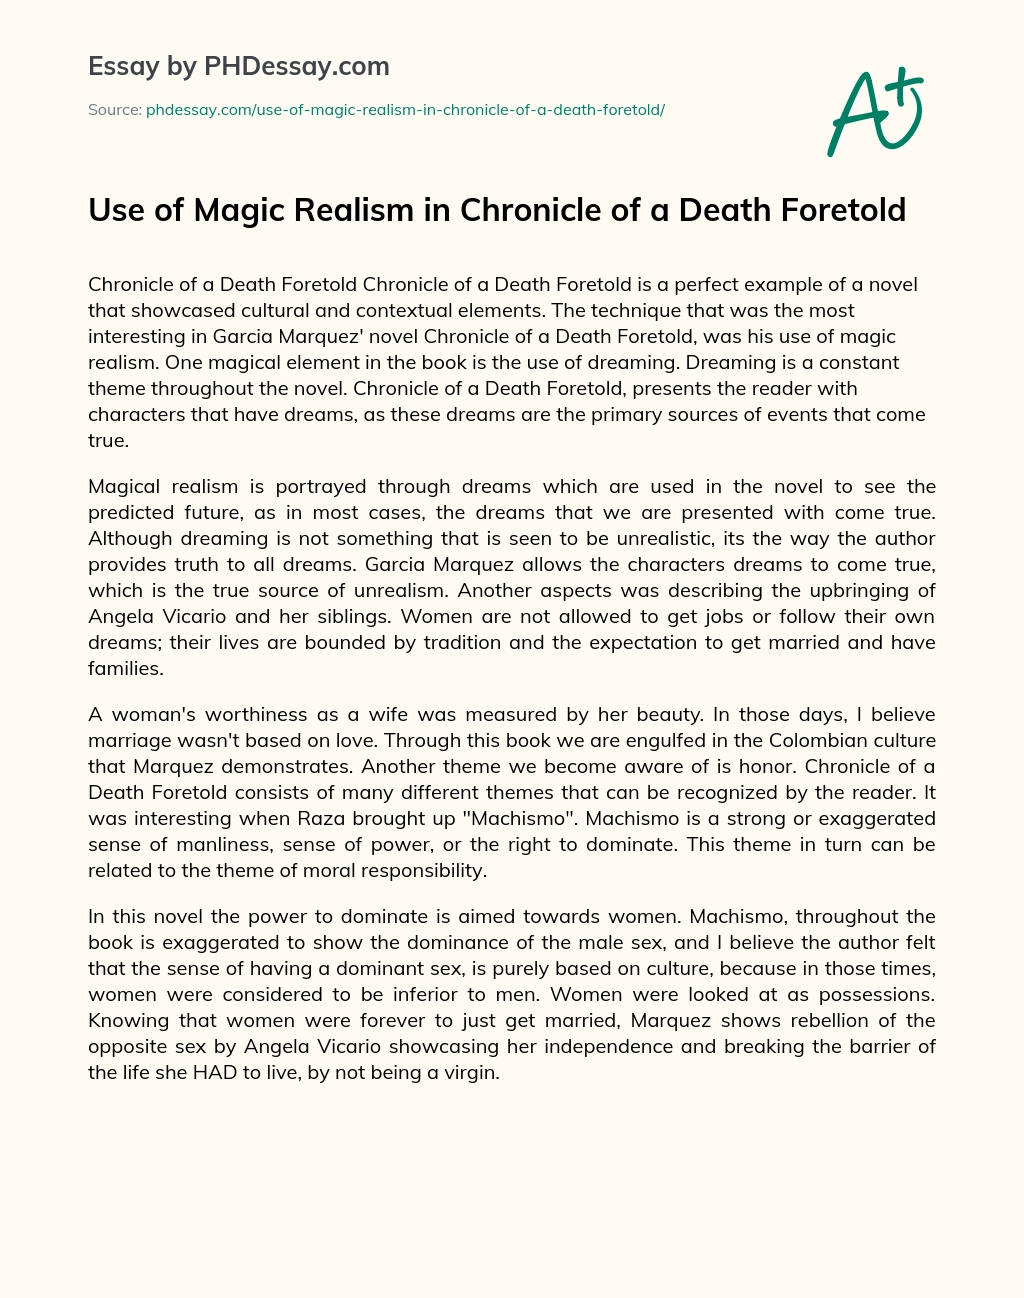 Use of Magic Realism in Chronicle of a Death Foretold essay